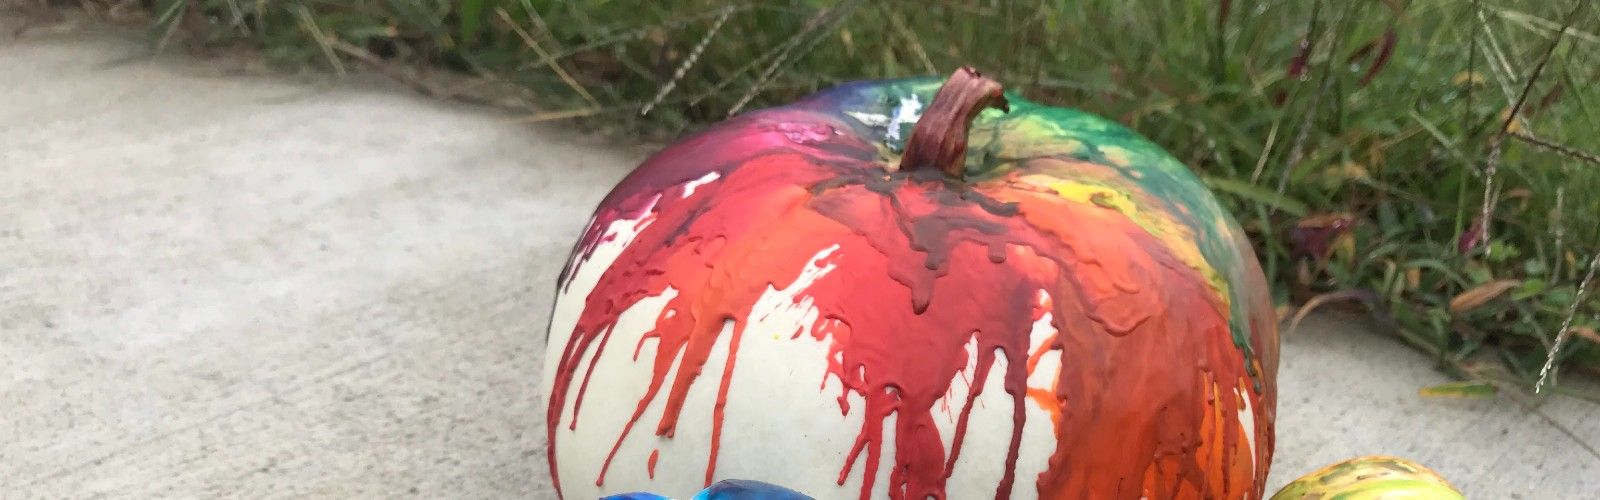 white pumpkins covered with melted crayon wax